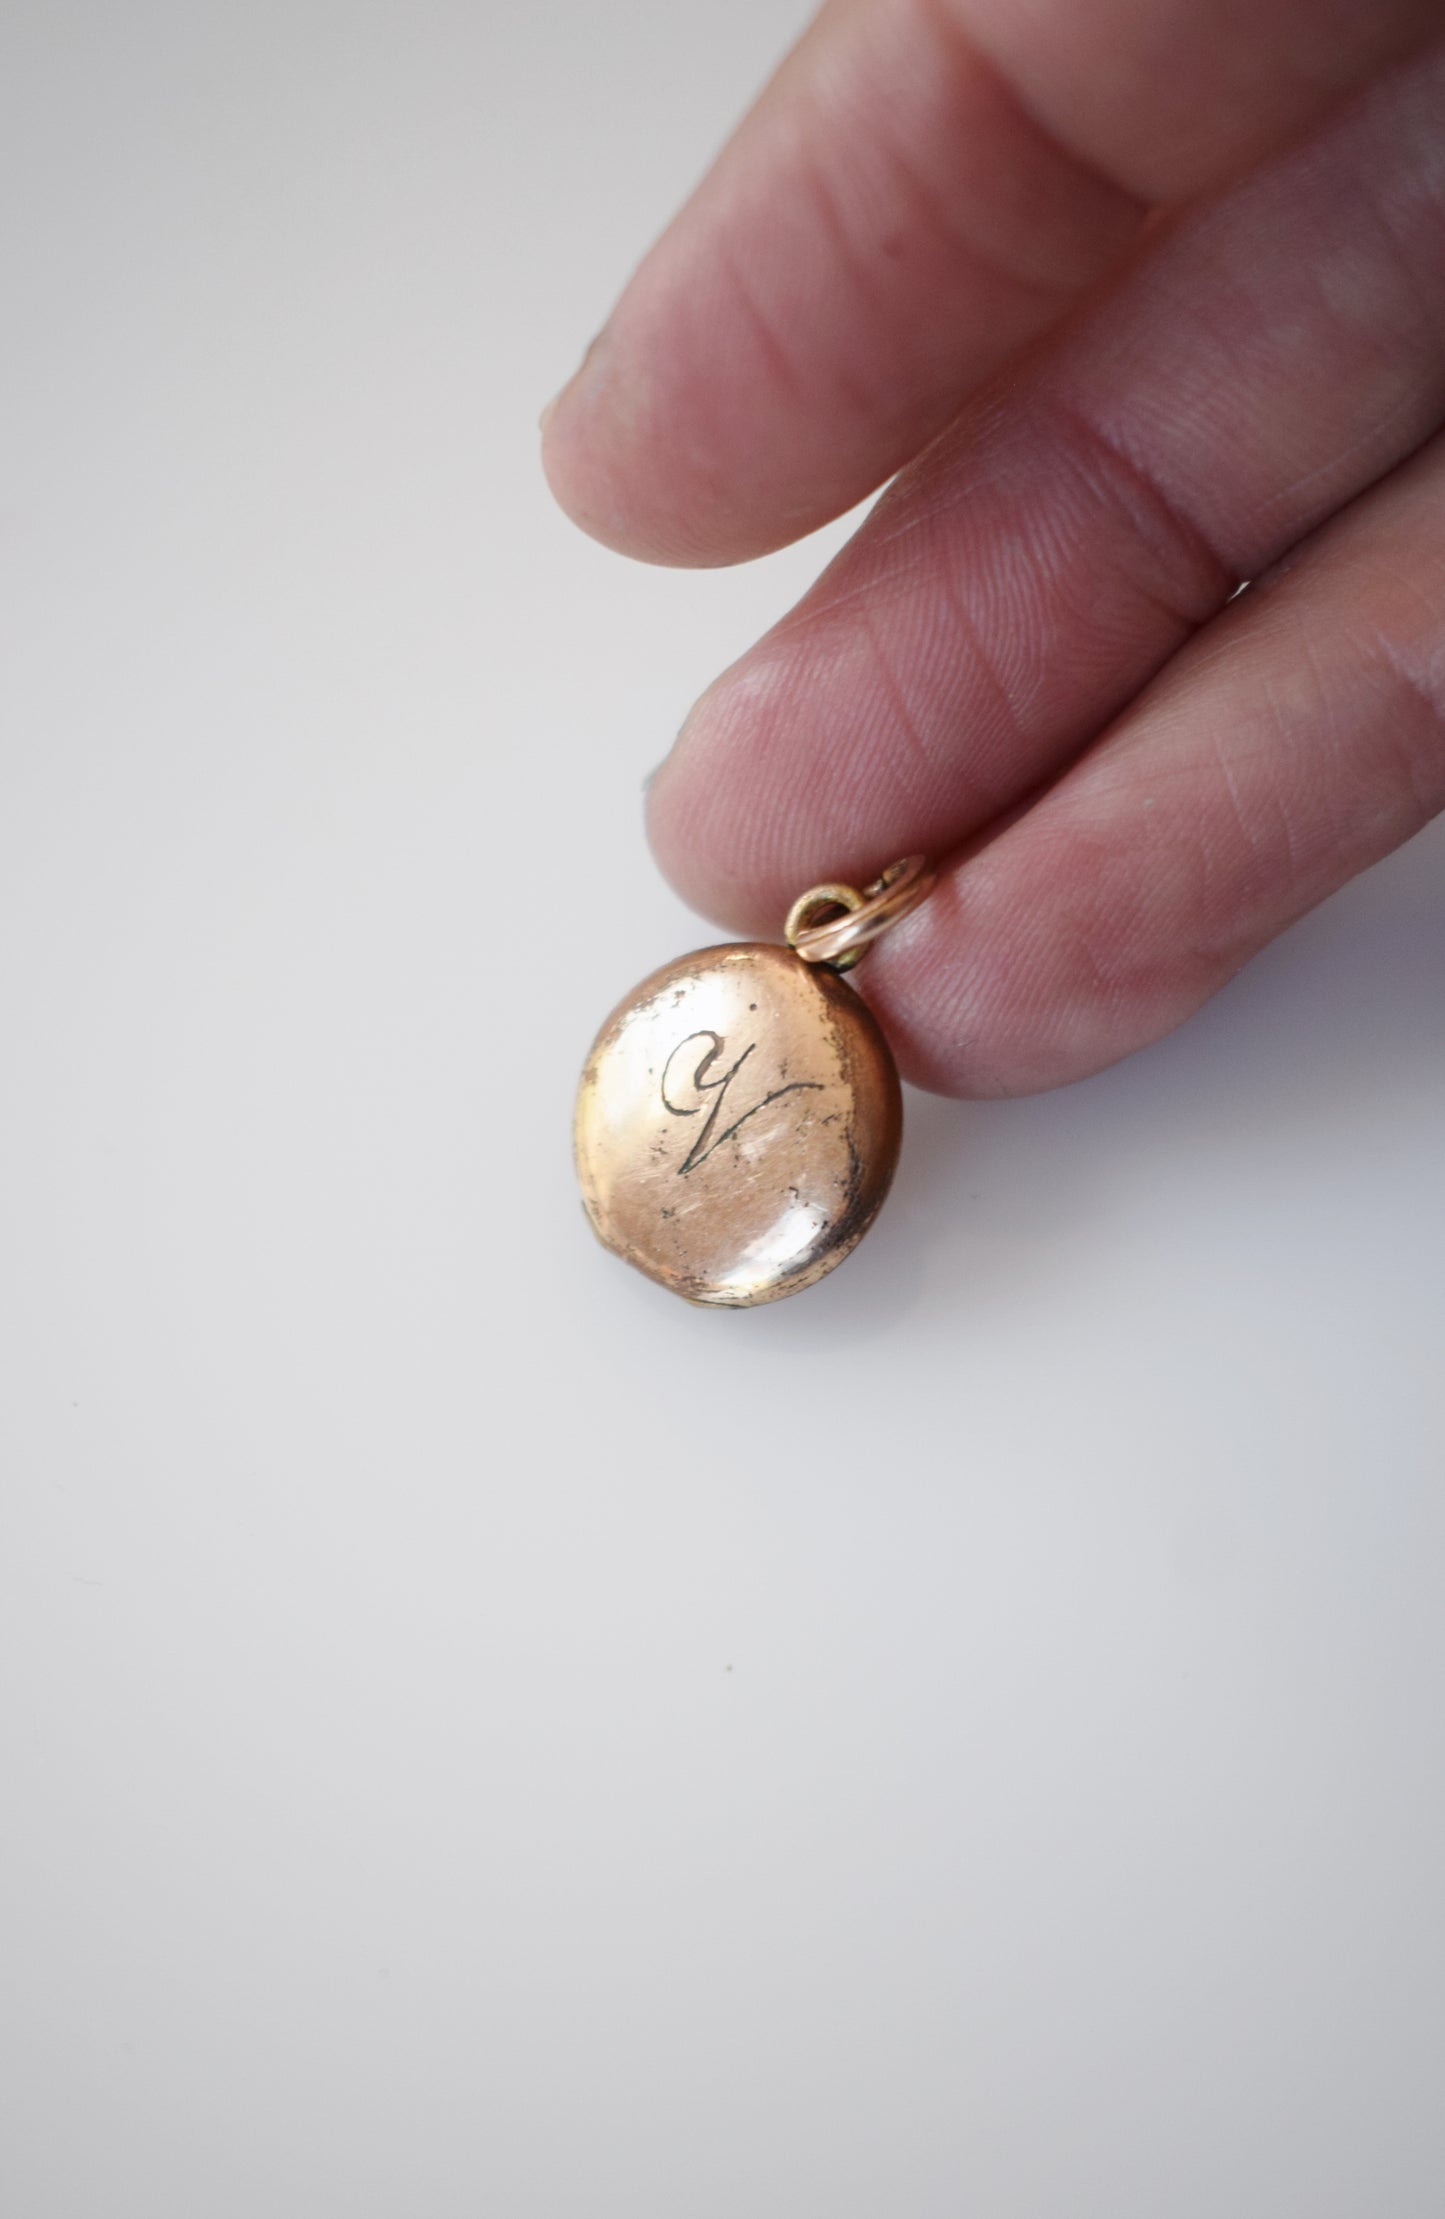 Petite Antique Gold Locket with initial V